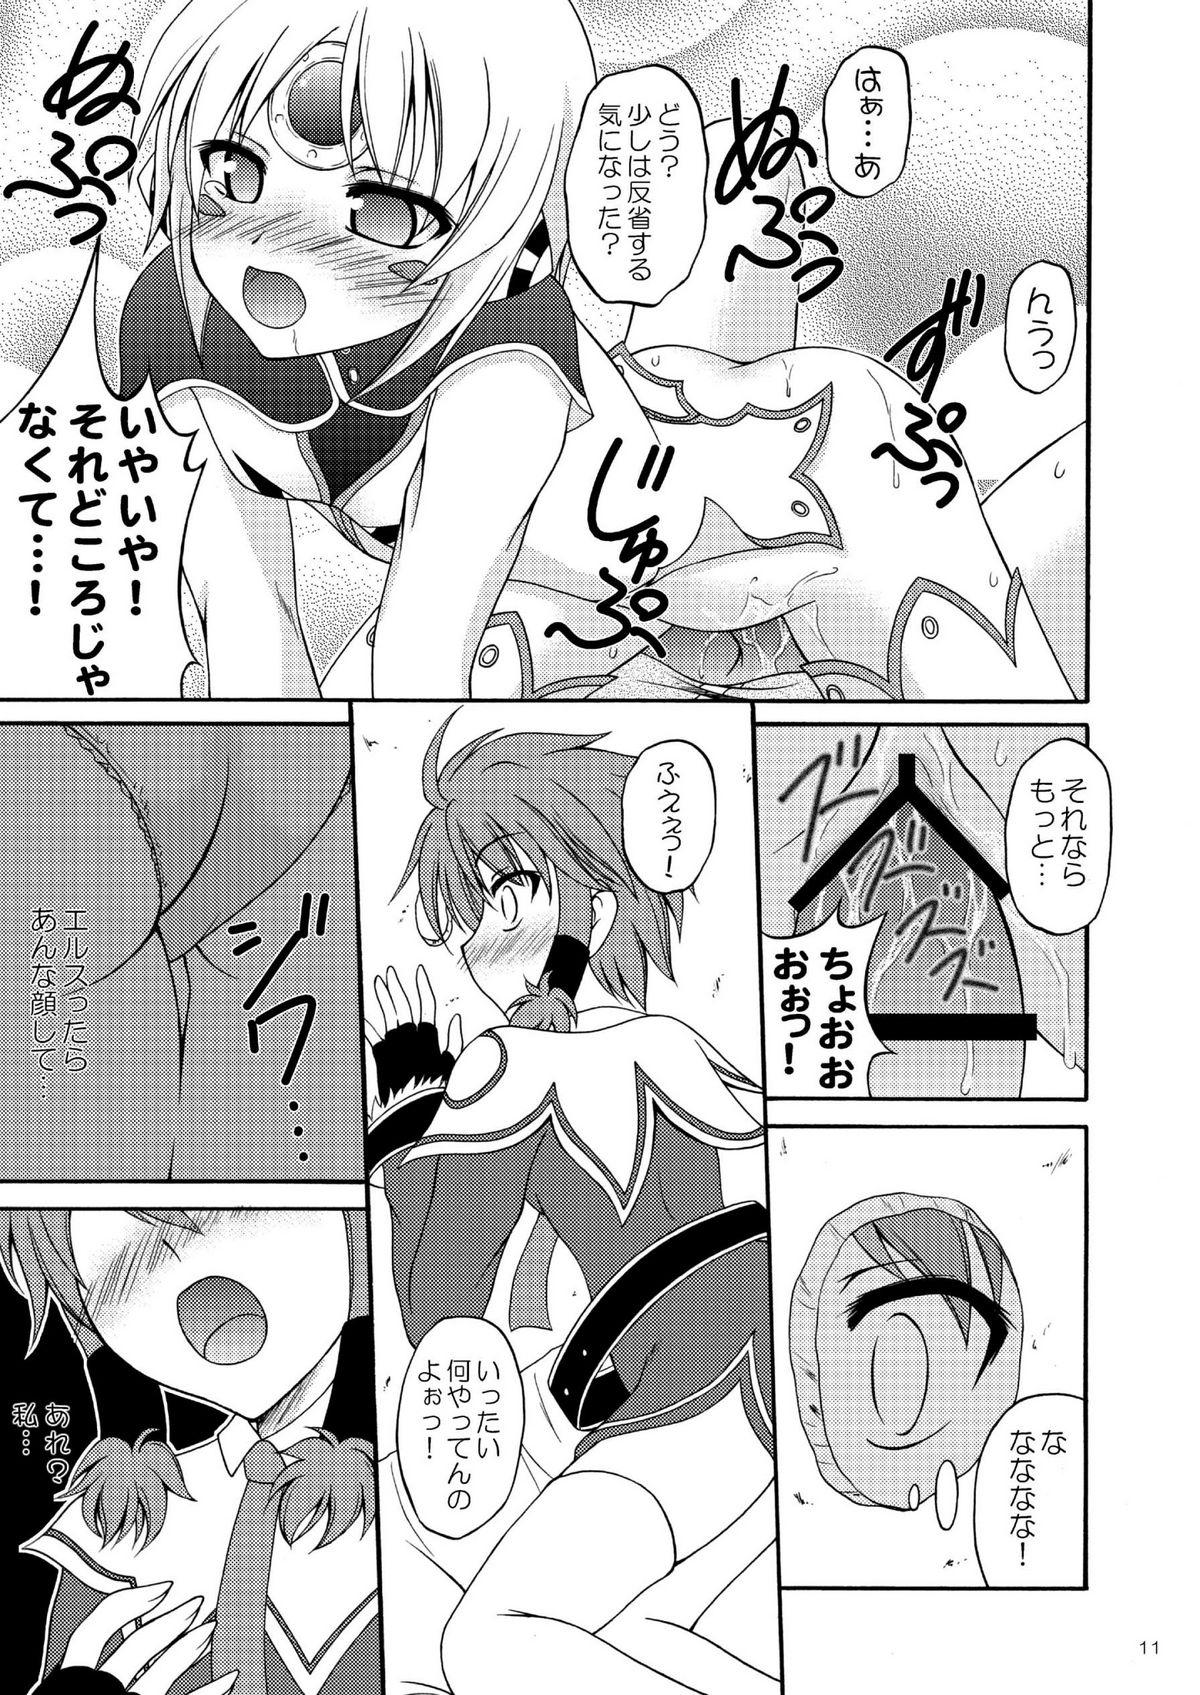 Masseuse E - Elsword Russian - Page 11